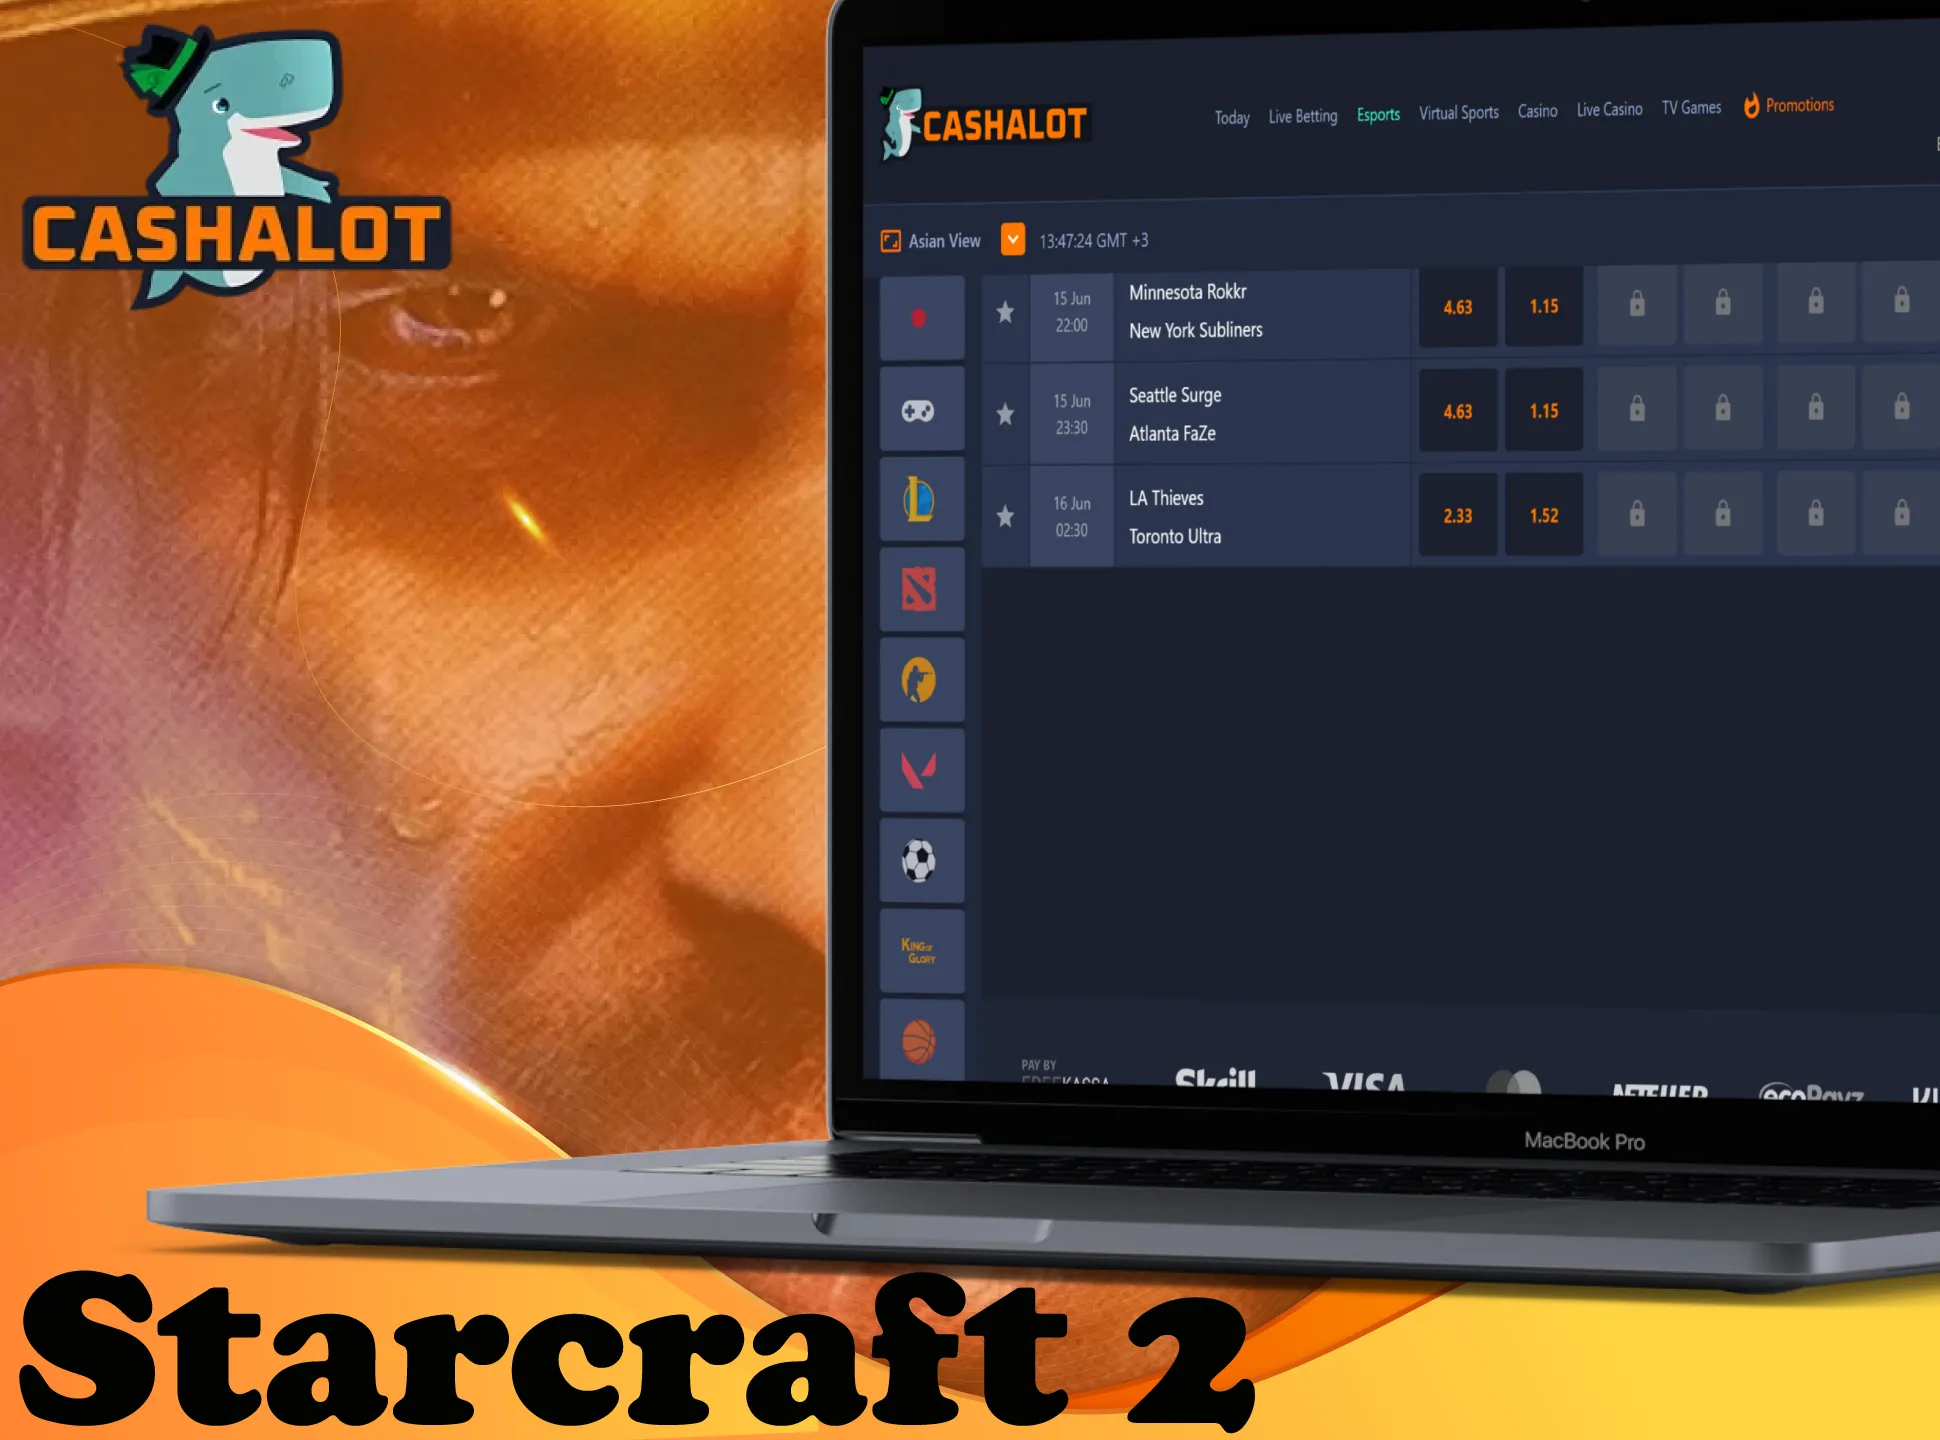 Watch Starcraft 2 matches on the special Cashalot page.